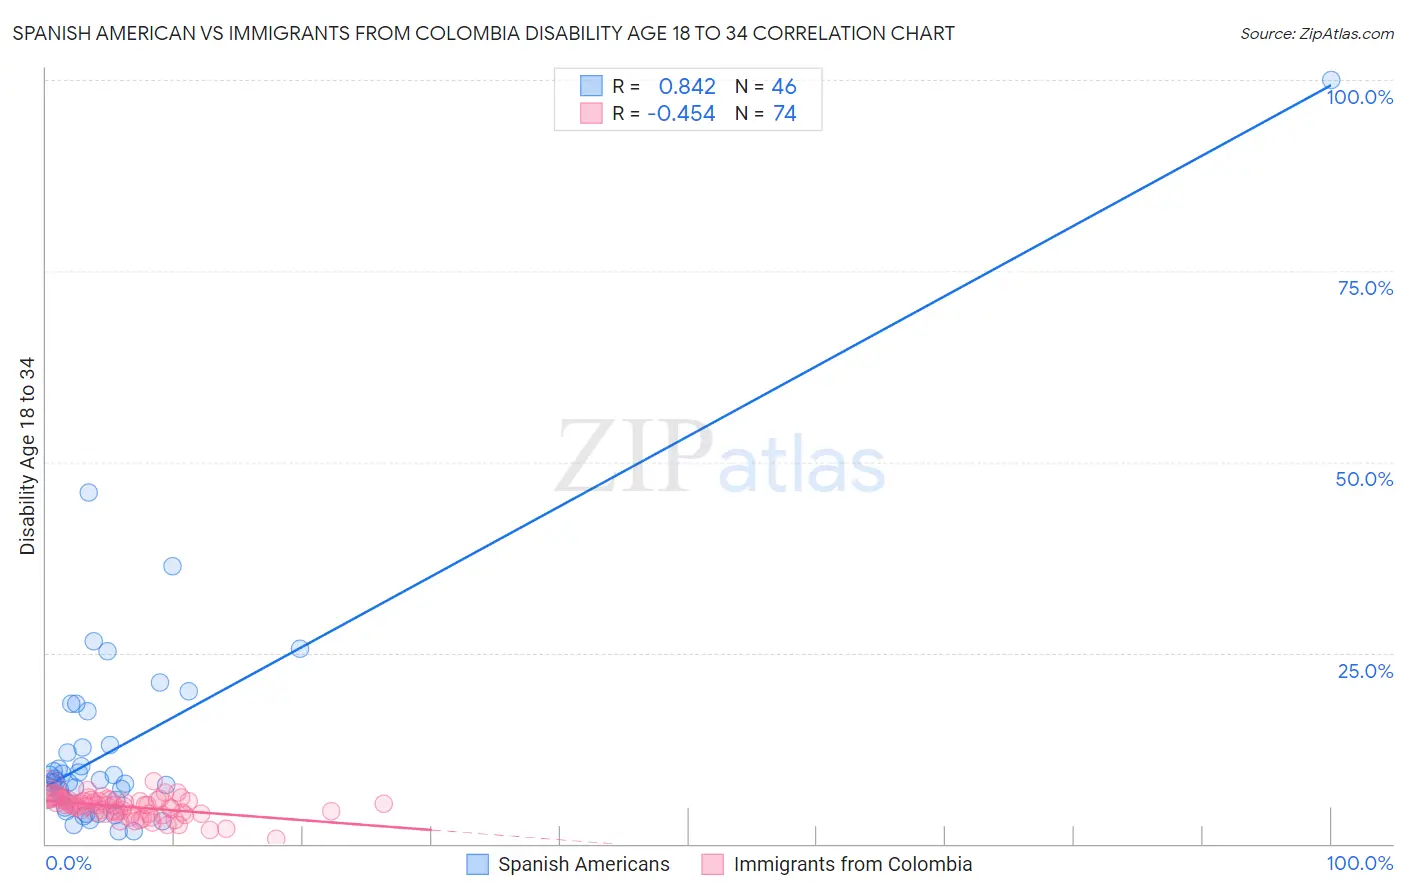 Spanish American vs Immigrants from Colombia Disability Age 18 to 34